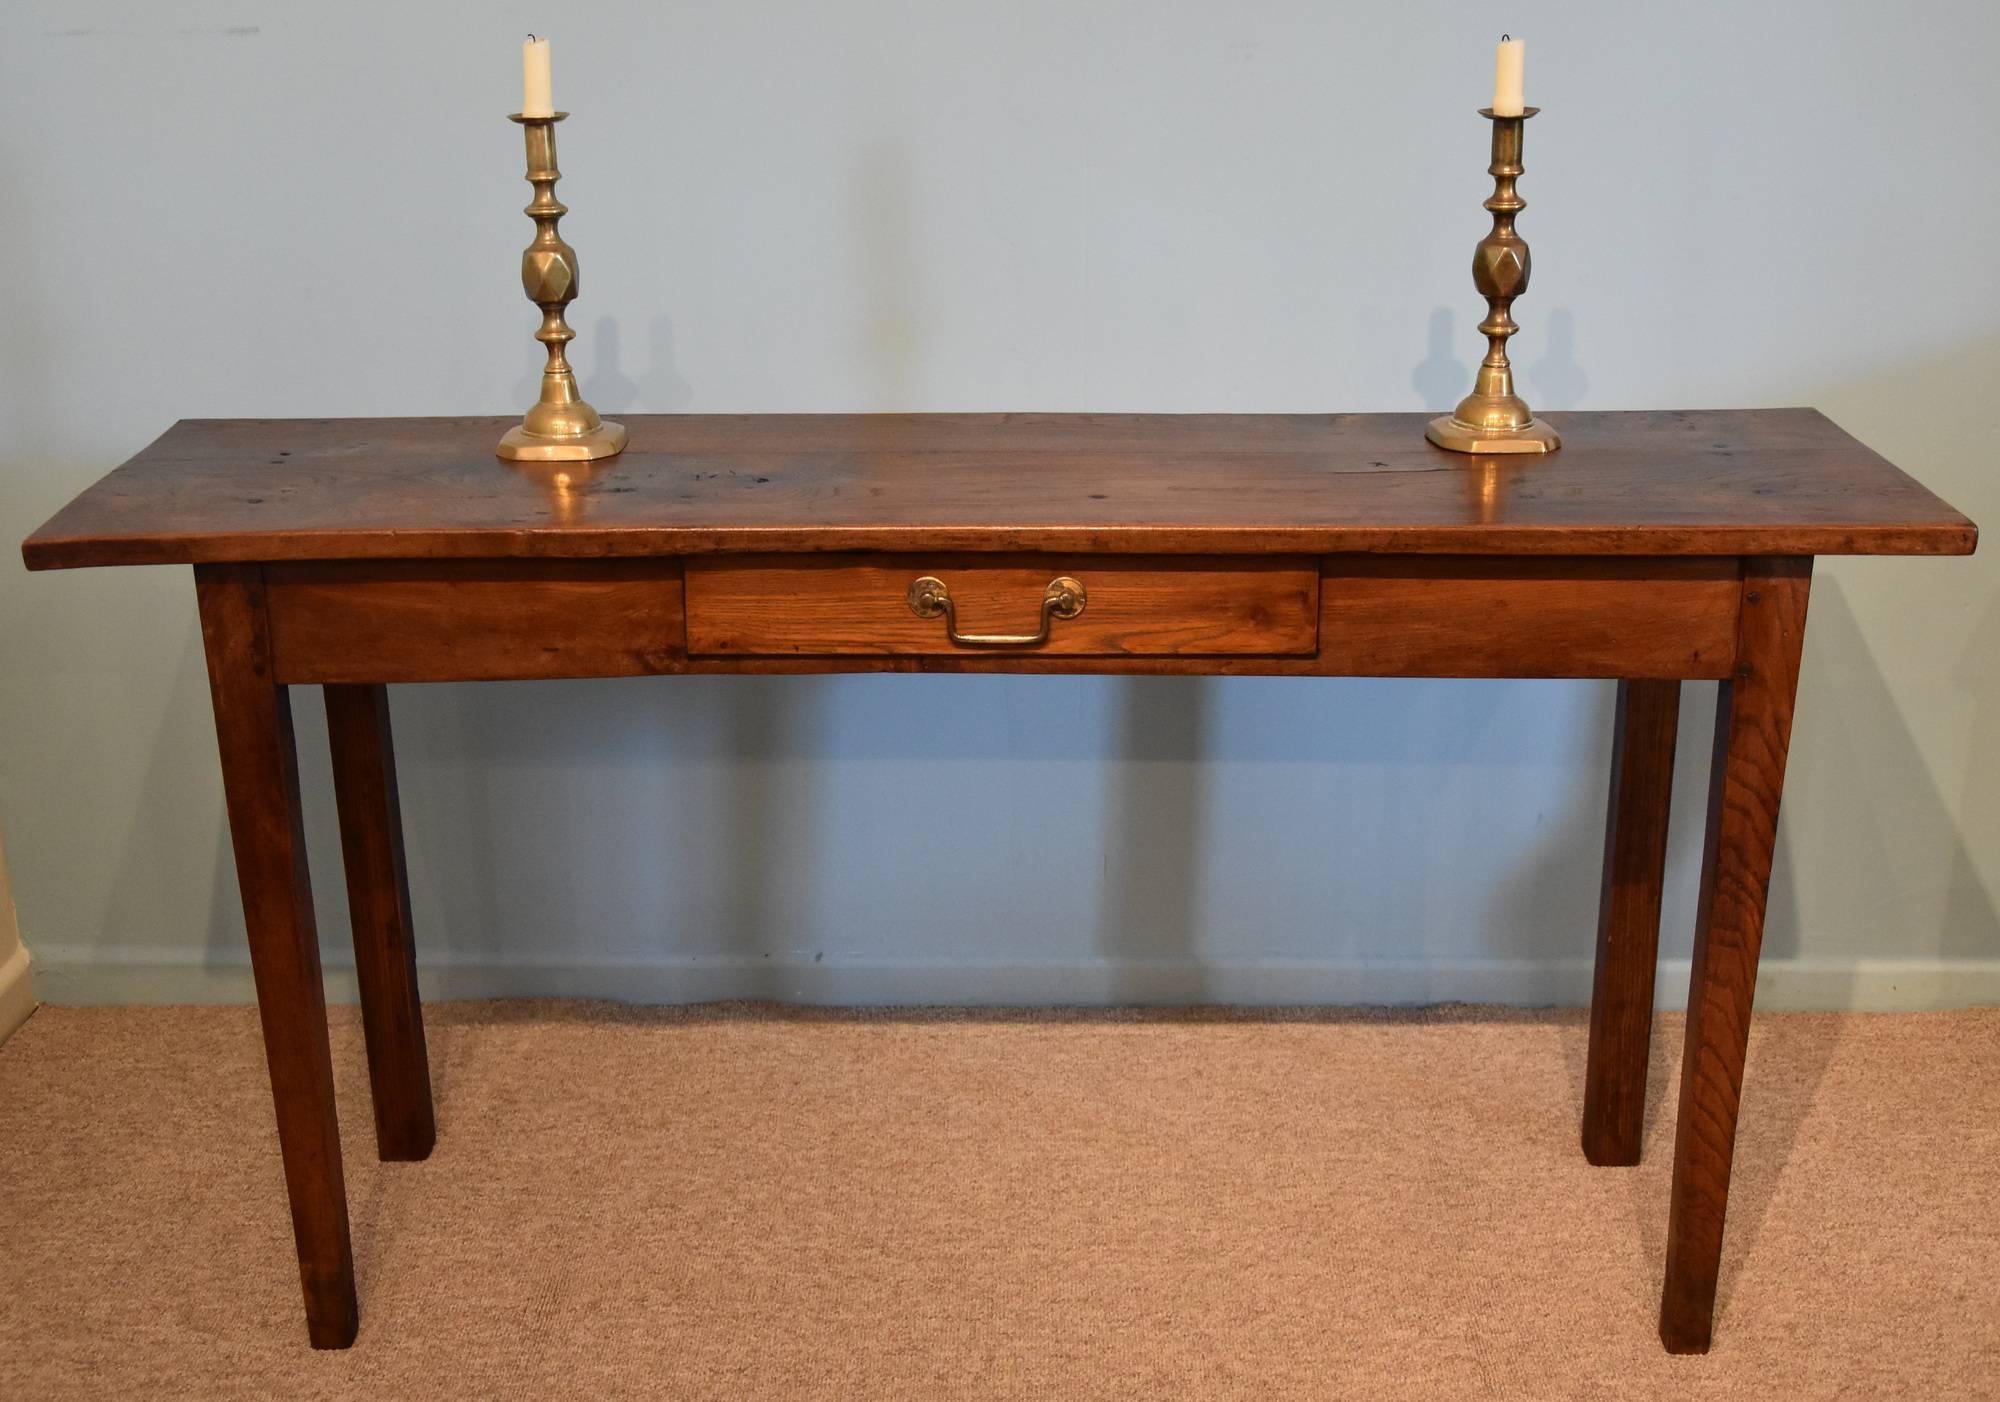 An attractive French chestnut serving table of good proportions with single drawer, circa 1850.

All of the items that we advertise for sale have been as accurately described as possible and are in excellent condition, unless otherwise stated.